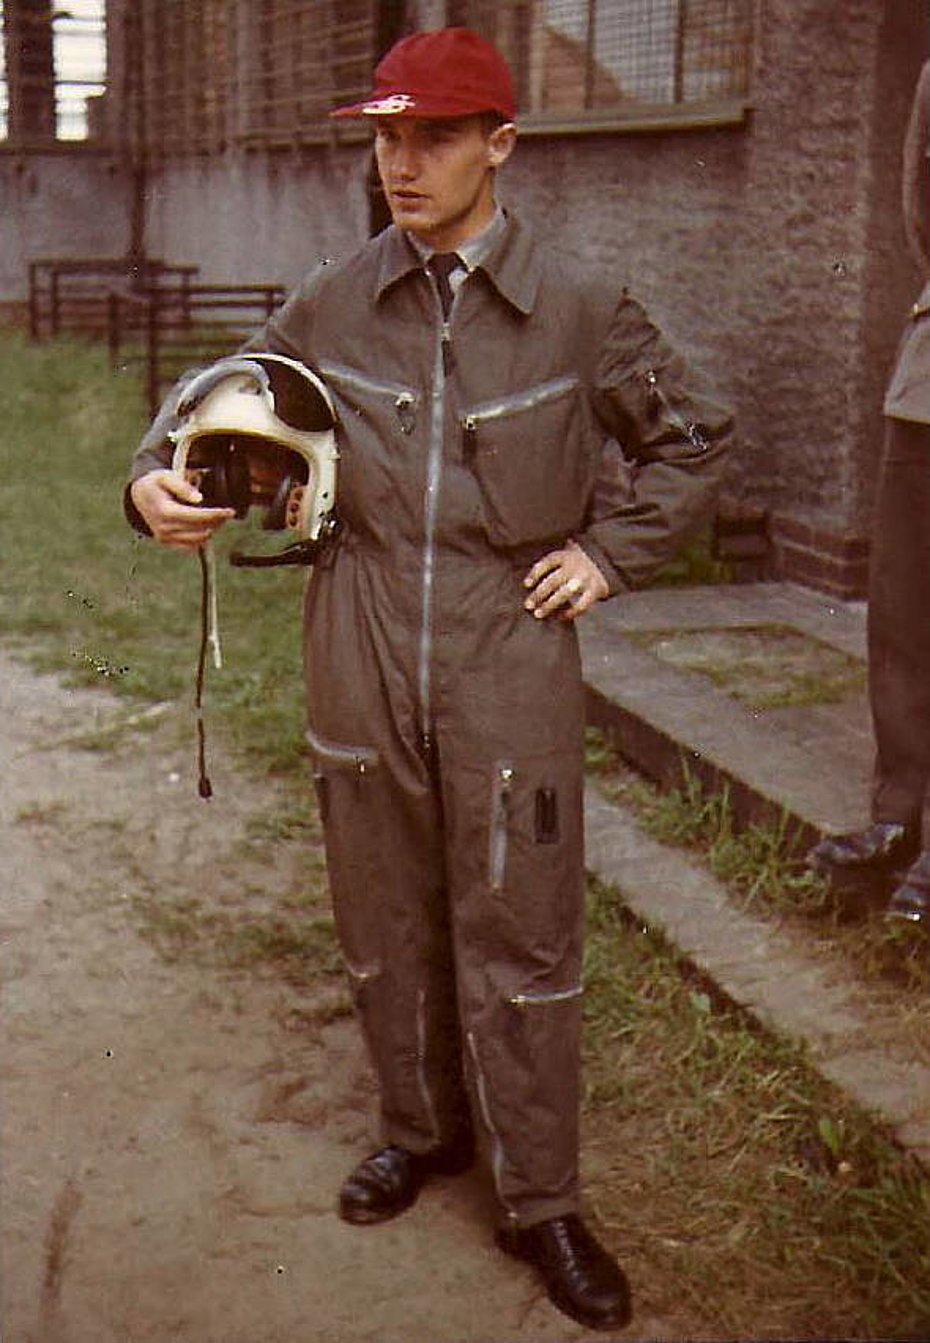 1962 - The young Günther pilot of the Heeresflieger